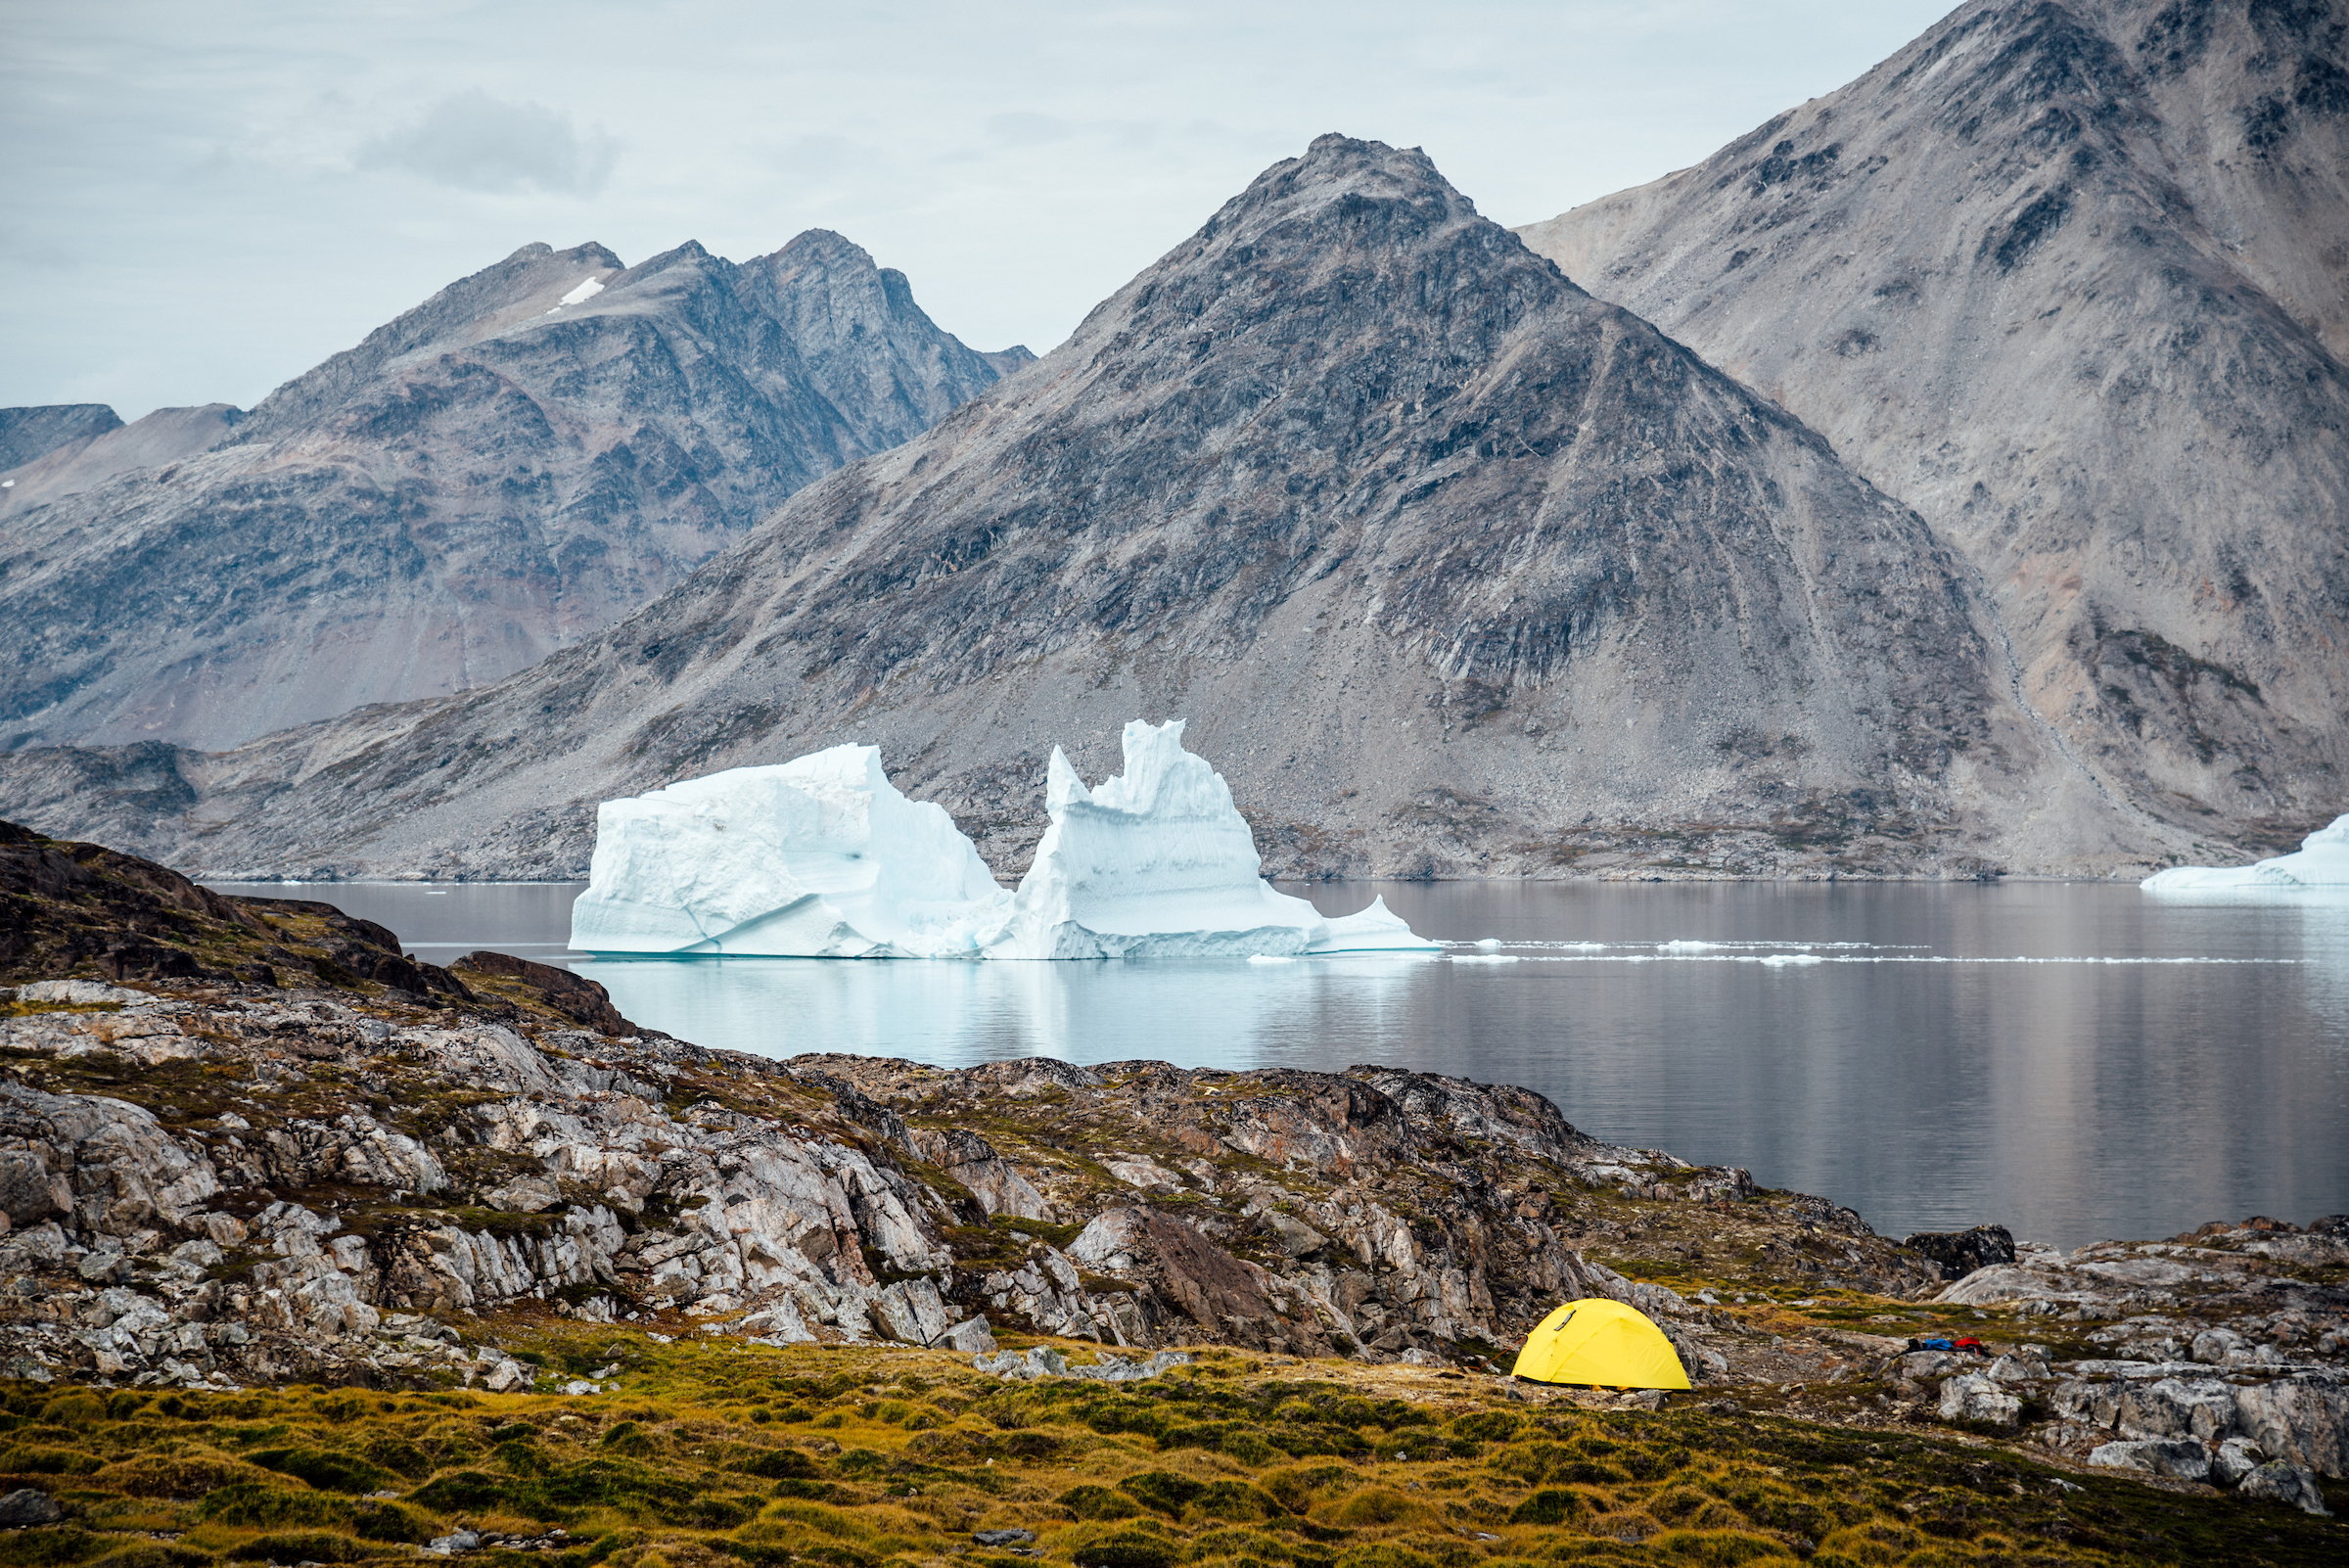 A tent site with an iceberg in the background, Between Kulusuk and Kuummiut. Photo - Chris B. Lee, Visit Greenland